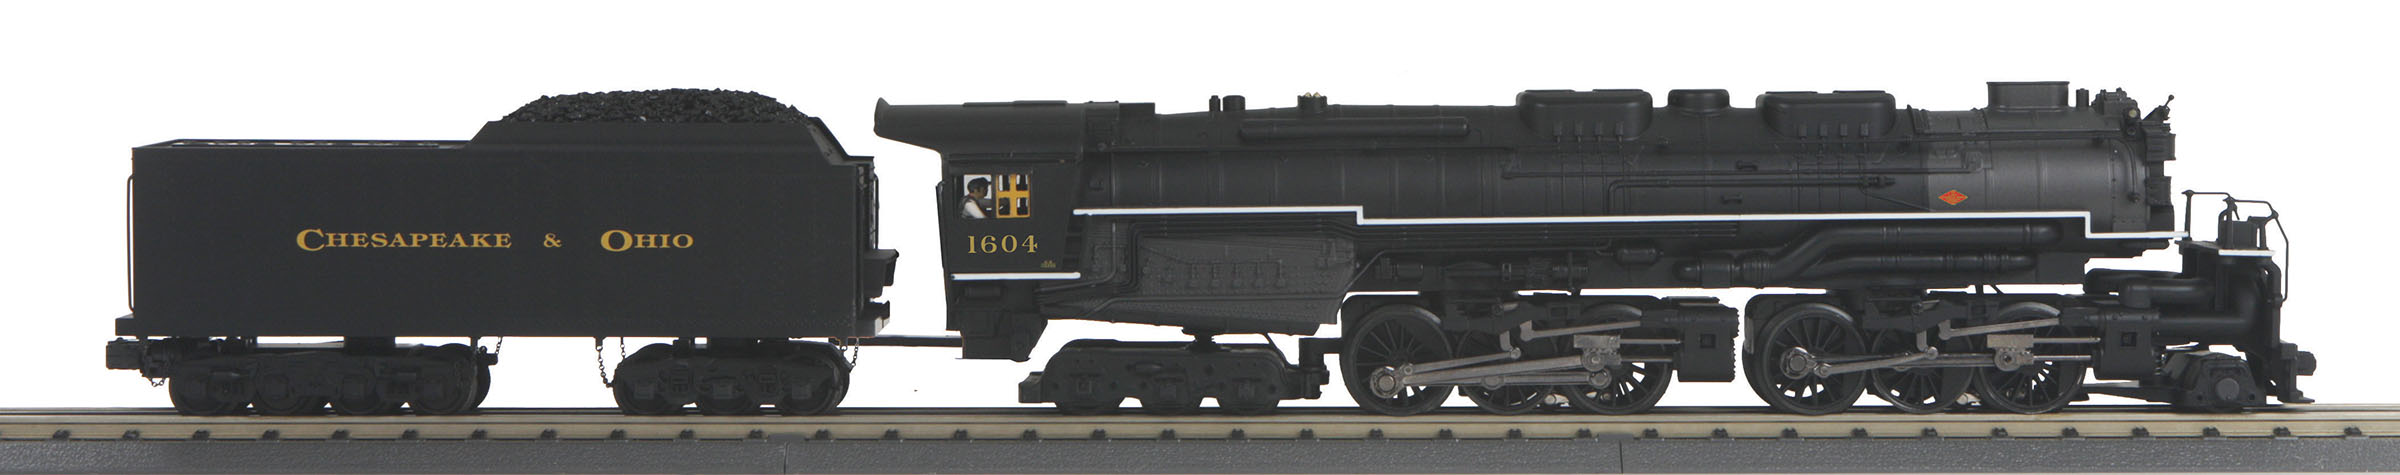 30-1729-1 | MTH ELECTRIC TRAINS